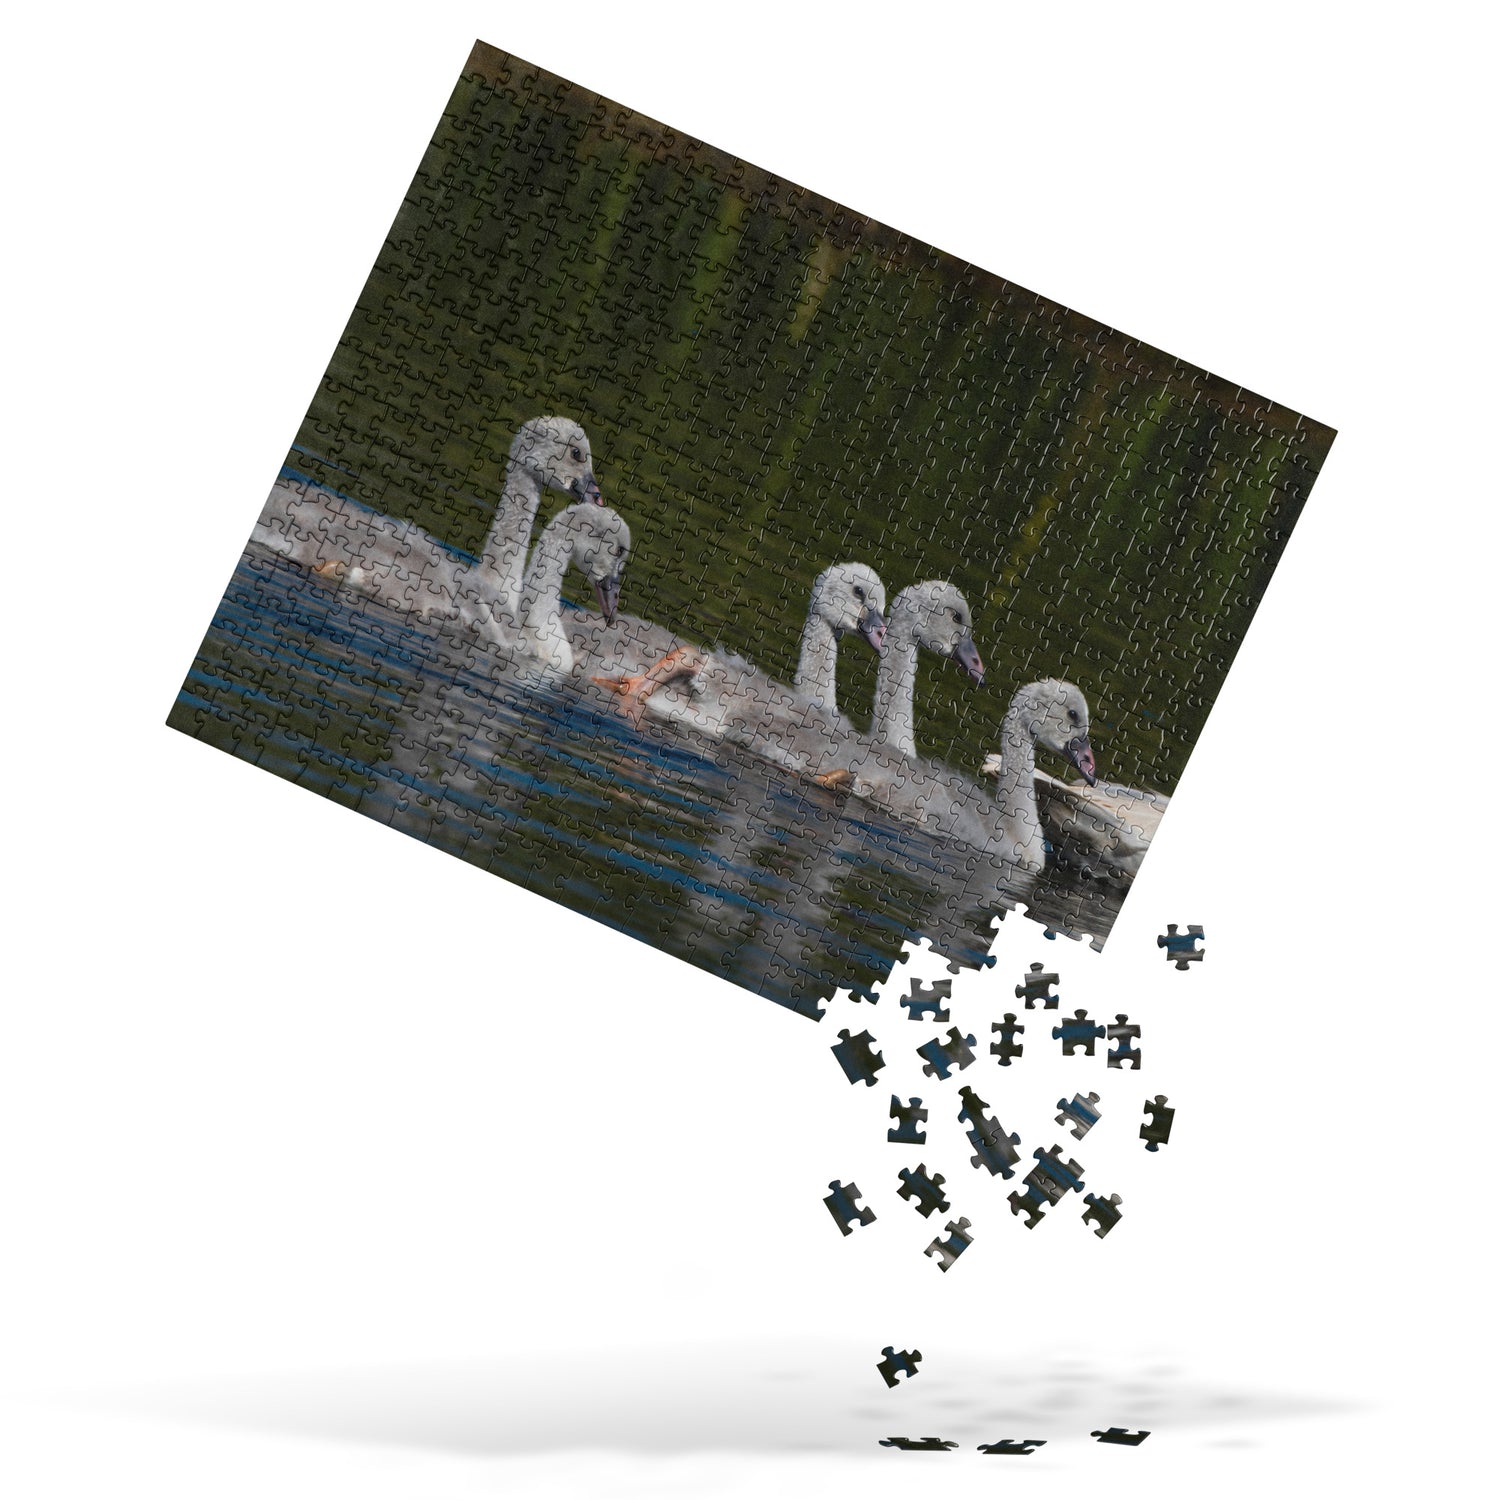 Baby Swans Jigsaw puzzle